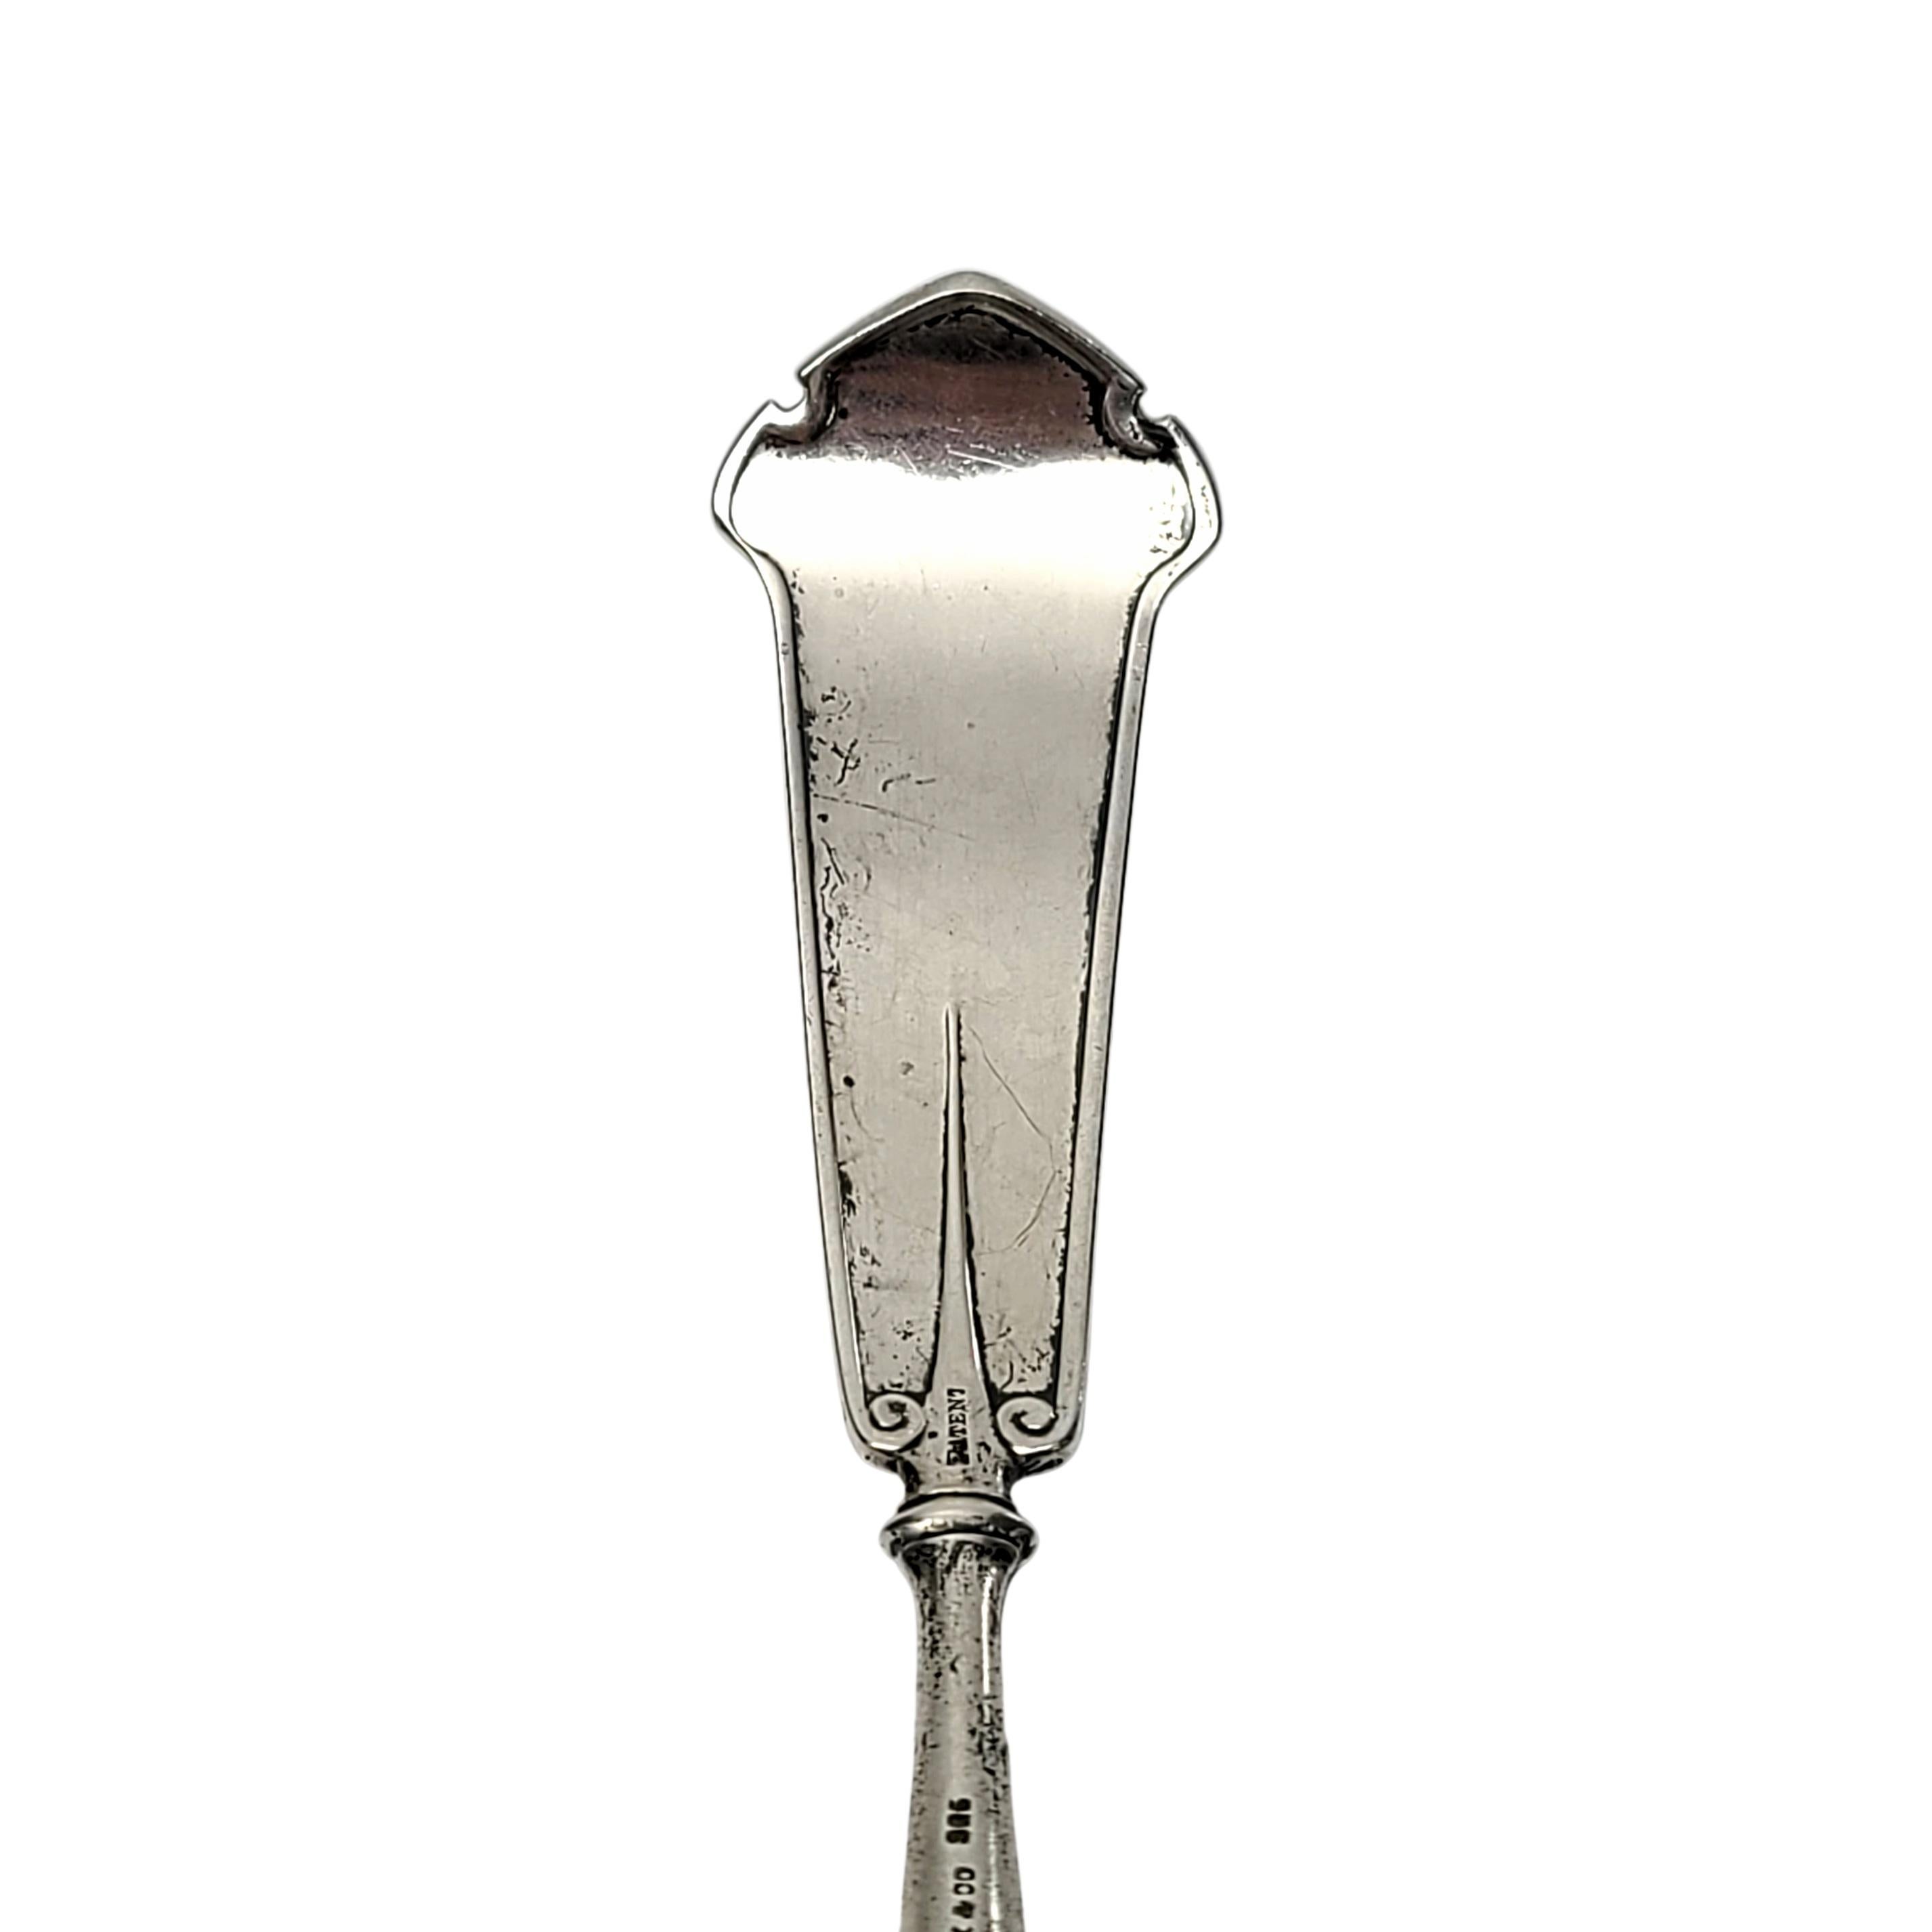 John Wendt Ball Black & Co Sterling Silver Arabesque Gravy Ladle with Monogram In Good Condition For Sale In Washington Depot, CT